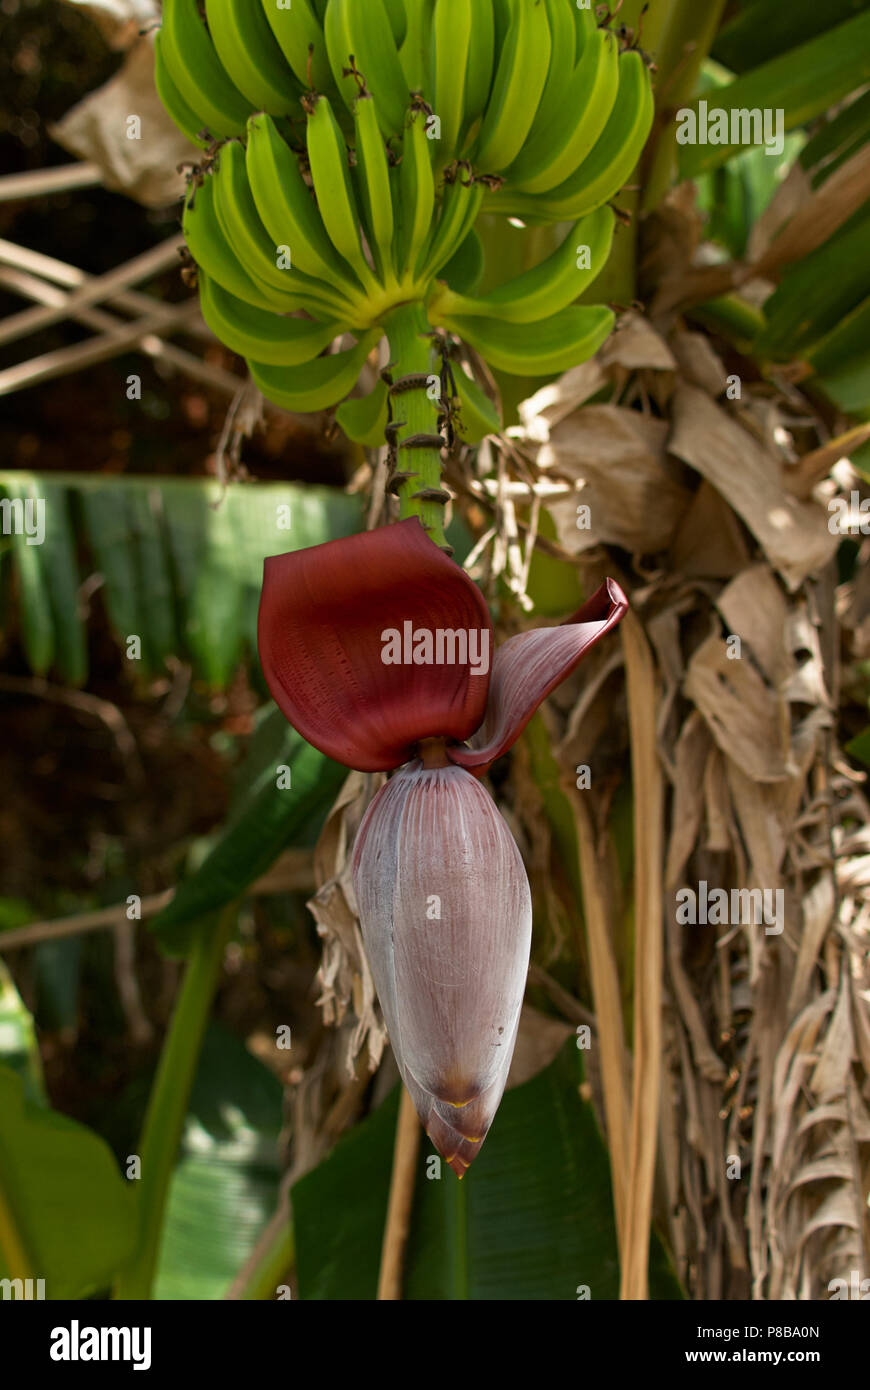 Banana (musa acuminata) showing inflorescence. The banana plant can be used to make beer, paper, wine, and is a source of fiber, minerals and vitamins Stock Photo